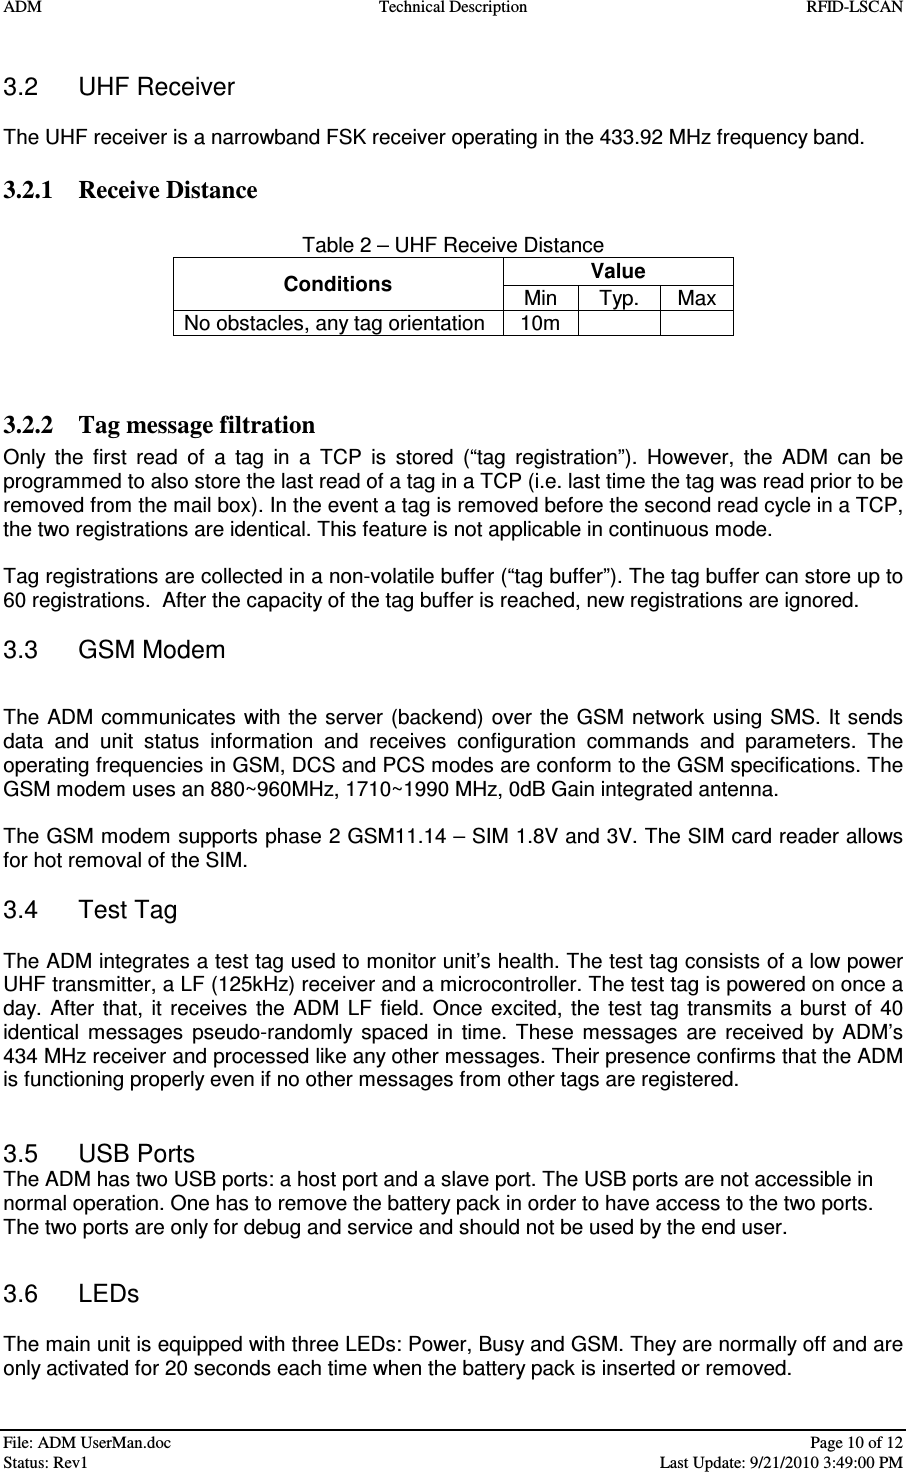 ADM  Technical Description  RFID-LSCAN   File: ADM UserMan.doc    Page 10 of 12  Status: Rev1    Last Update: 9/21/2010 3:49:00 PM  3.2  UHF Receiver  The UHF receiver is a narrowband FSK receiver operating in the 433.92 MHz frequency band.  3.2.1 Receive Distance  Table 2 – UHF Receive Distance Value  Conditions  Min   Typ.  Max No obstacles, any tag orientation  10m       3.2.2 Tag message filtration Only  the  first  read  of  a  tag  in  a  TCP  is  stored  (“tag  registration”).  However,  the  ADM  can  be programmed to also store the last read of a tag in a TCP (i.e. last time the tag was read prior to be removed from the mail box). In the event a tag is removed before the second read cycle in a TCP, the two registrations are identical. This feature is not applicable in continuous mode.  Tag registrations are collected in a non-volatile buffer (“tag buffer”). The tag buffer can store up to 60 registrations.  After the capacity of the tag buffer is reached, new registrations are ignored.  3.3  GSM Modem  The  ADM communicates with the  server (backend)  over the GSM network  using SMS. It sends data  and  unit  status  information  and  receives  configuration  commands  and  parameters.  The operating frequencies in GSM, DCS and PCS modes are conform to the GSM specifications. The GSM modem uses an 880~960MHz, 1710~1990 MHz, 0dB Gain integrated antenna.  The GSM modem supports phase 2 GSM11.14 – SIM 1.8V and 3V. The SIM card reader allows for hot removal of the SIM.   3.4  Test Tag  The ADM integrates a test tag used to monitor unit’s health. The test tag consists of a low power UHF transmitter, a LF (125kHz) receiver and a microcontroller. The test tag is powered on once a day.  After  that,  it  receives  the  ADM LF field. Once  excited,  the  test  tag transmits  a burst of  40 identical  messages  pseudo-randomly  spaced  in  time.  These  messages  are  received  by  ADM’s 434 MHz receiver and processed like any other messages. Their presence confirms that the ADM is functioning properly even if no other messages from other tags are registered.   3.5  USB Ports The ADM has two USB ports: a host port and a slave port. The USB ports are not accessible in normal operation. One has to remove the battery pack in order to have access to the two ports. The two ports are only for debug and service and should not be used by the end user.  3.6  LEDs  The main unit is equipped with three LEDs: Power, Busy and GSM. They are normally off and are only activated for 20 seconds each time when the battery pack is inserted or removed. 